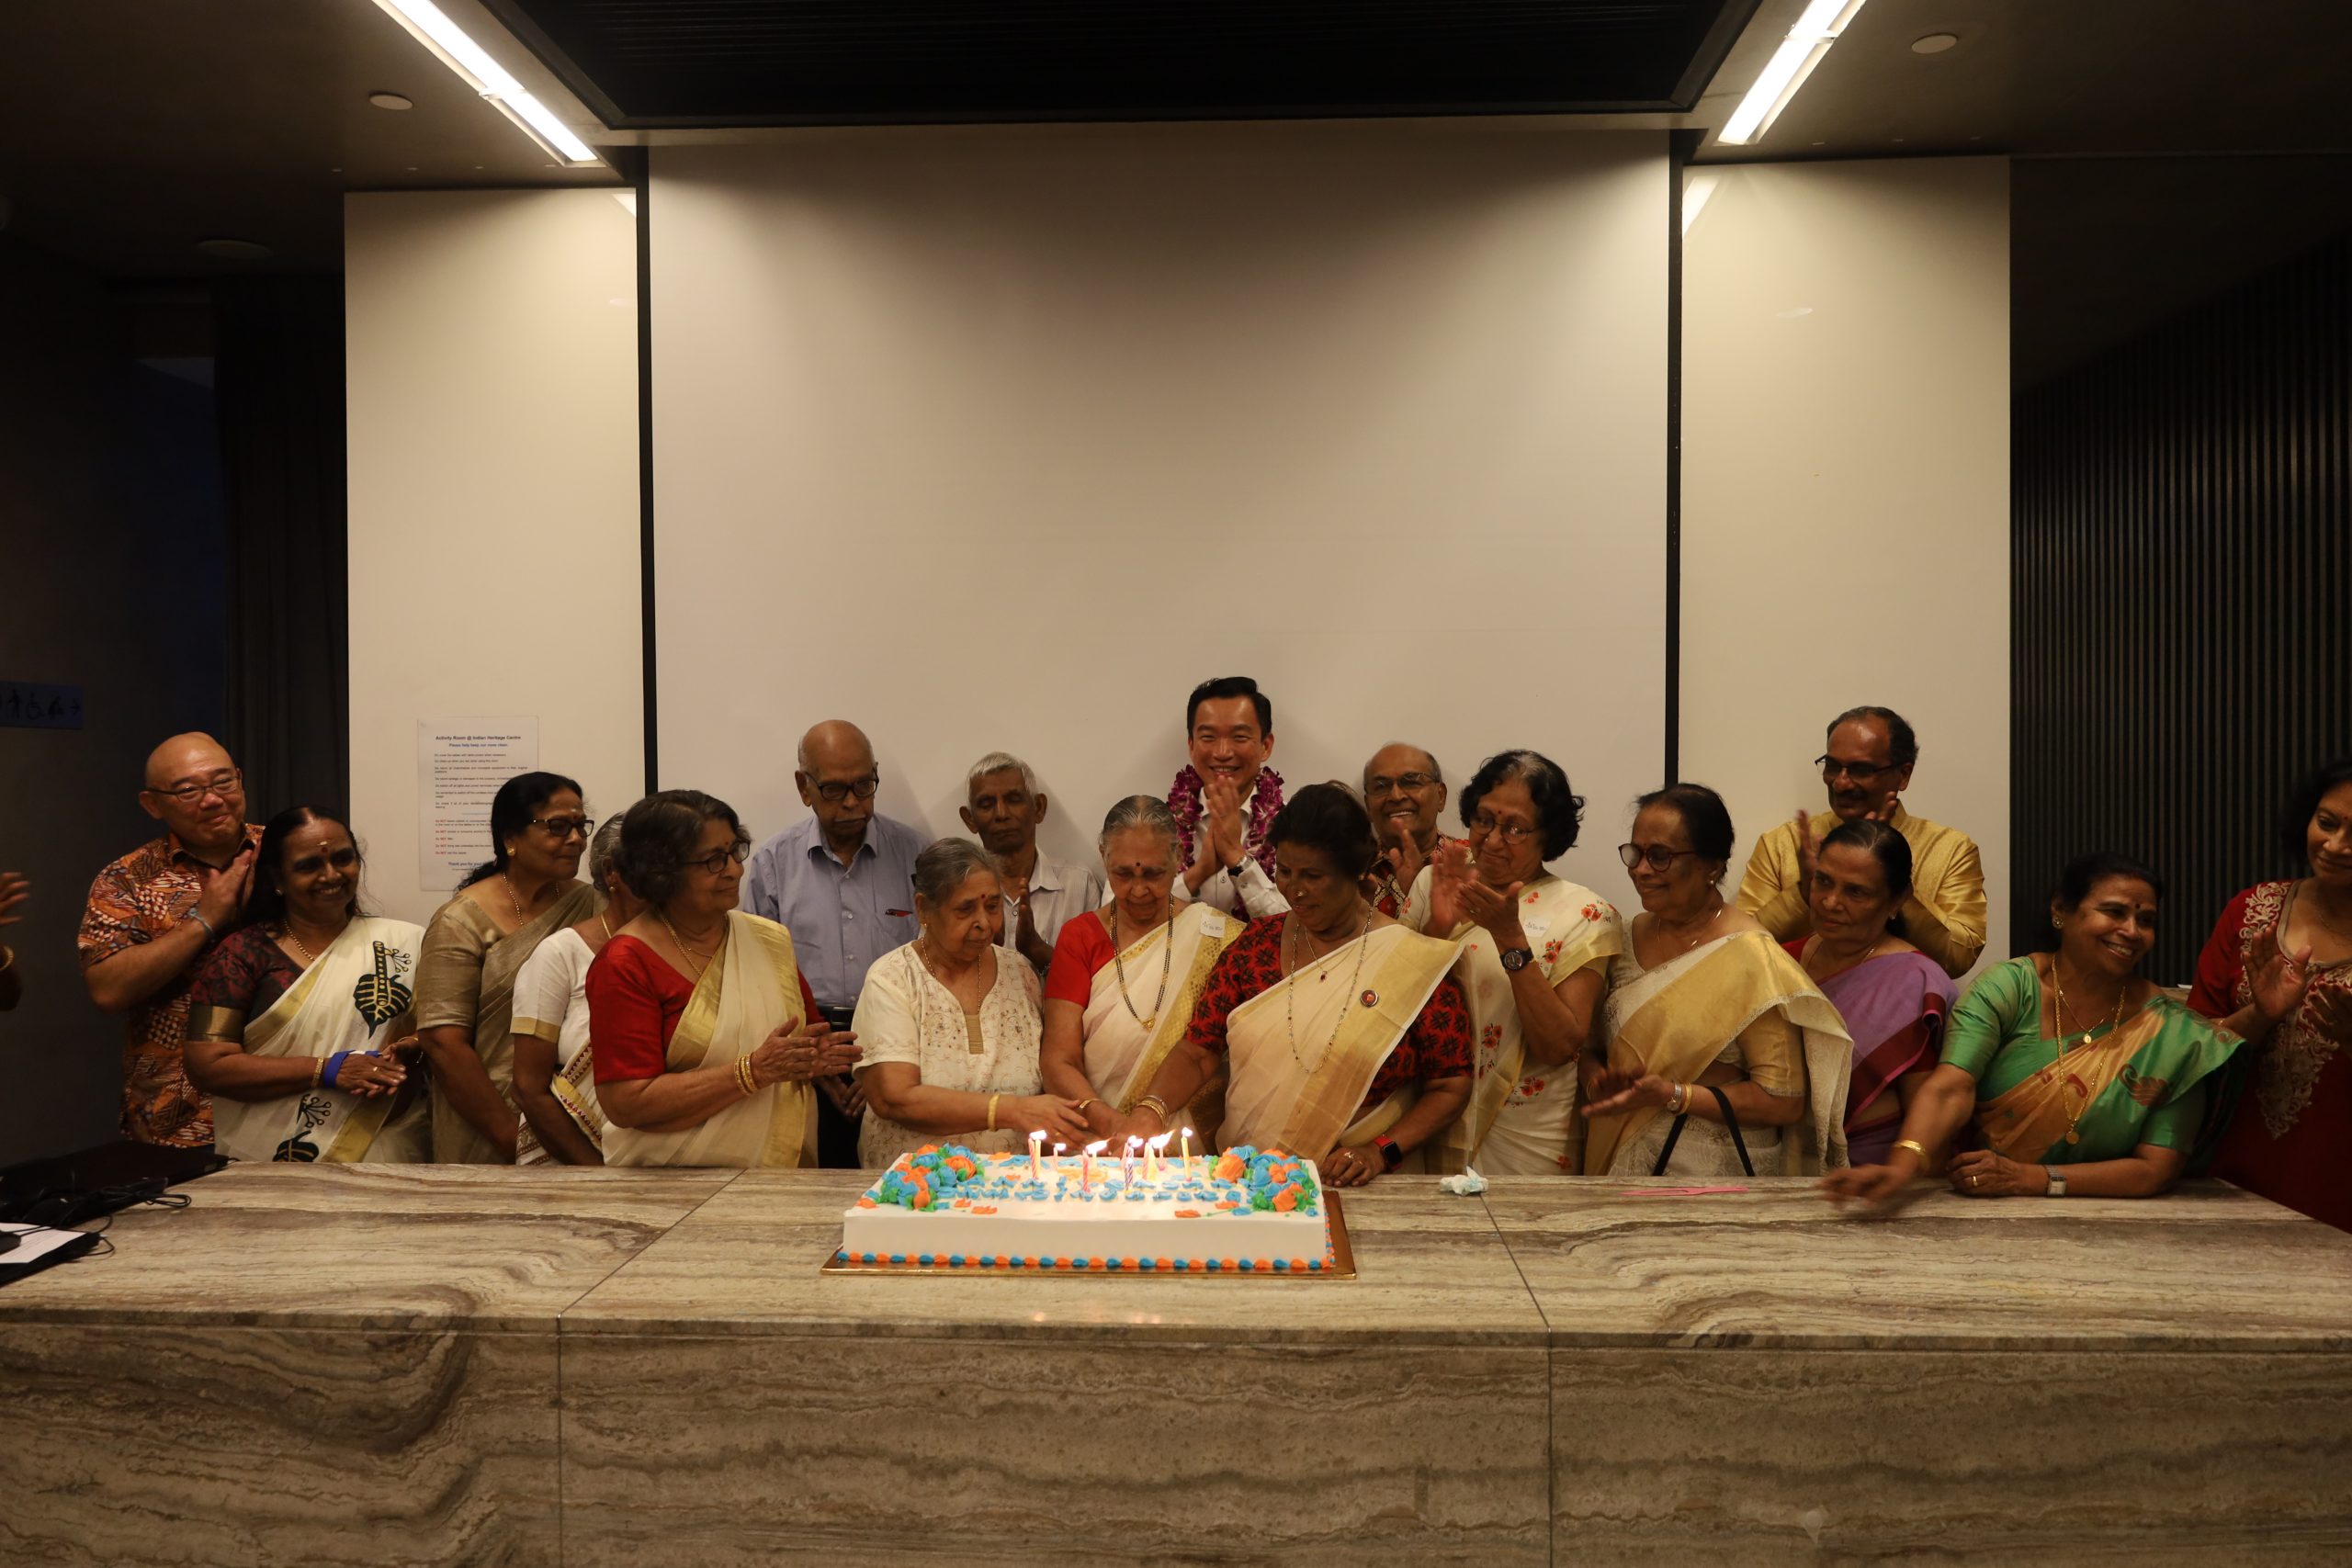 75th Anniversary Celebrations at the Indian Heritage Centre